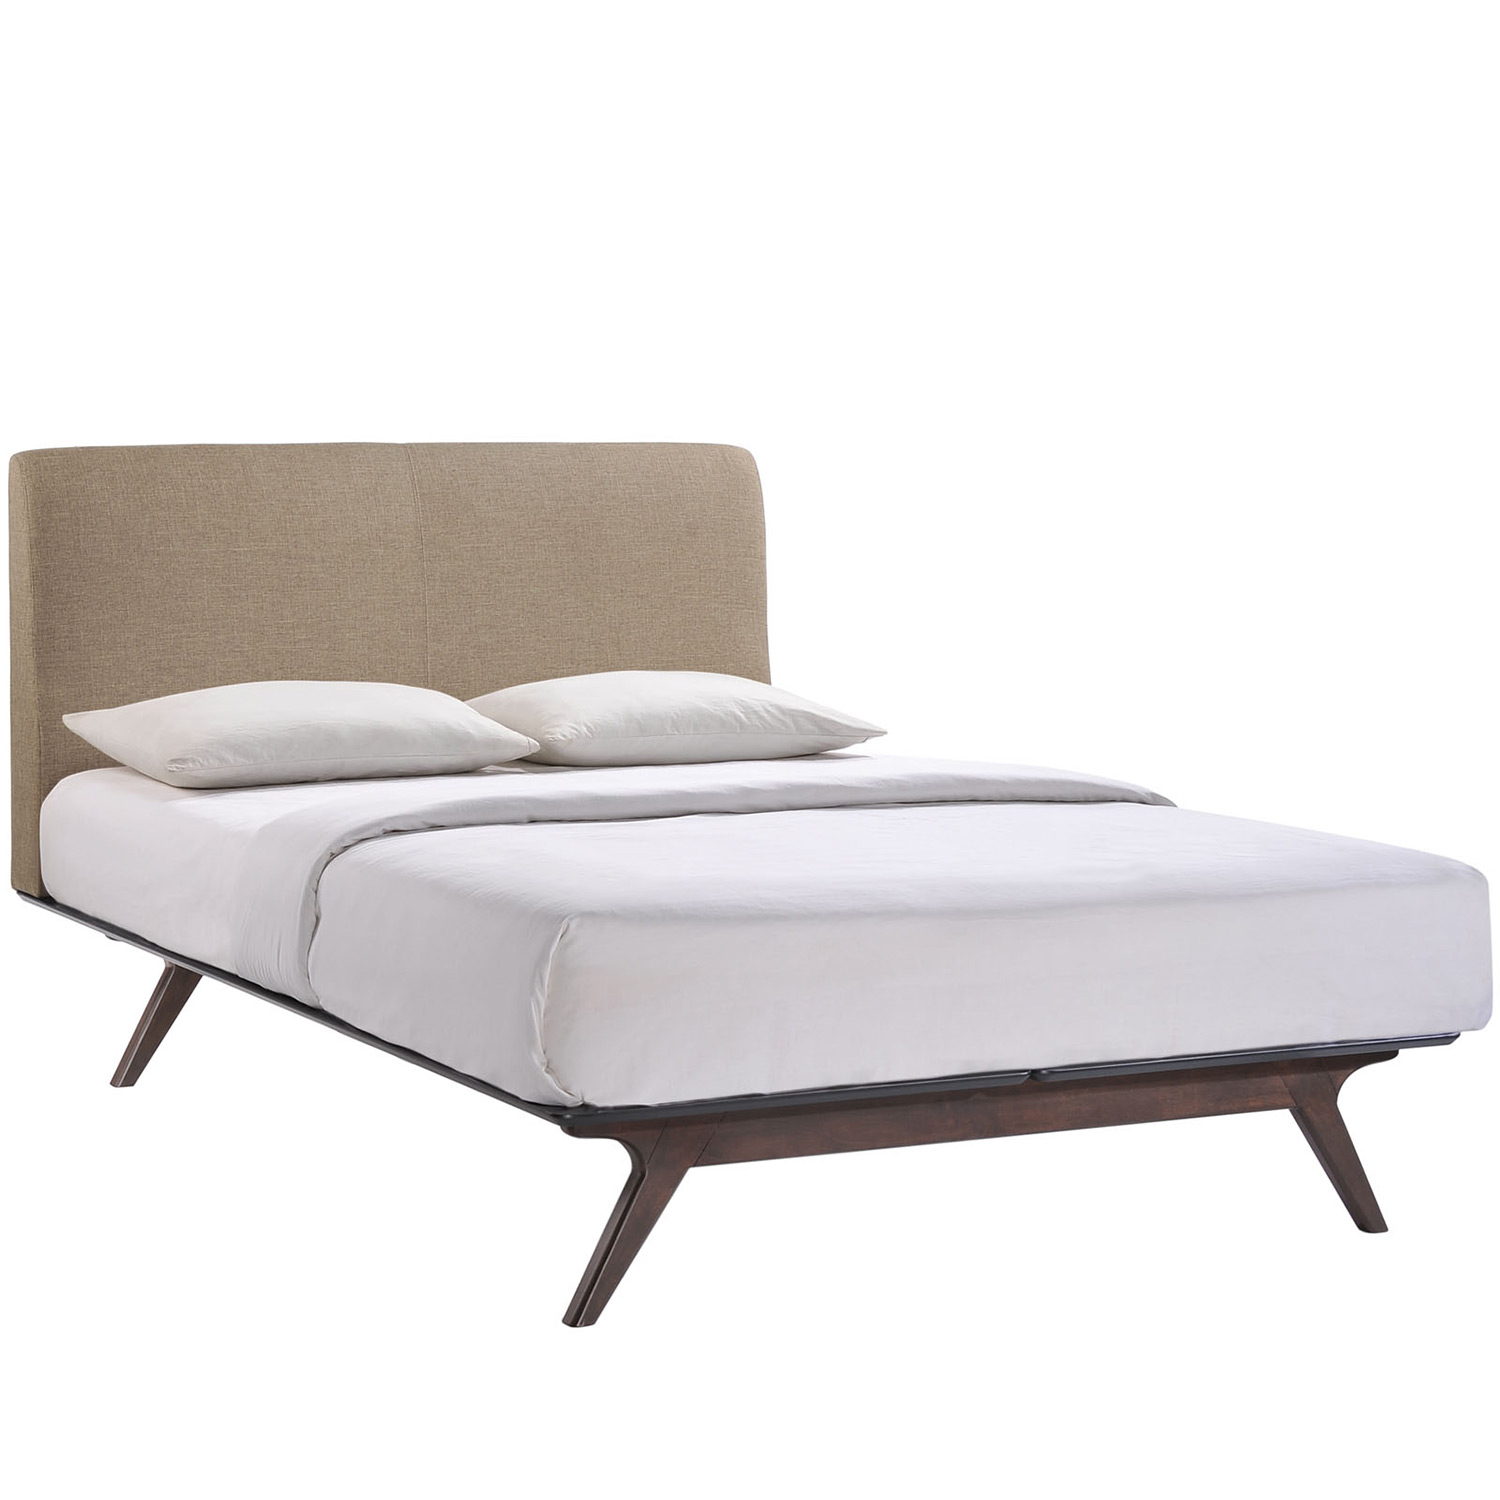 Modway Tracy Bed - Cappuccino Latte